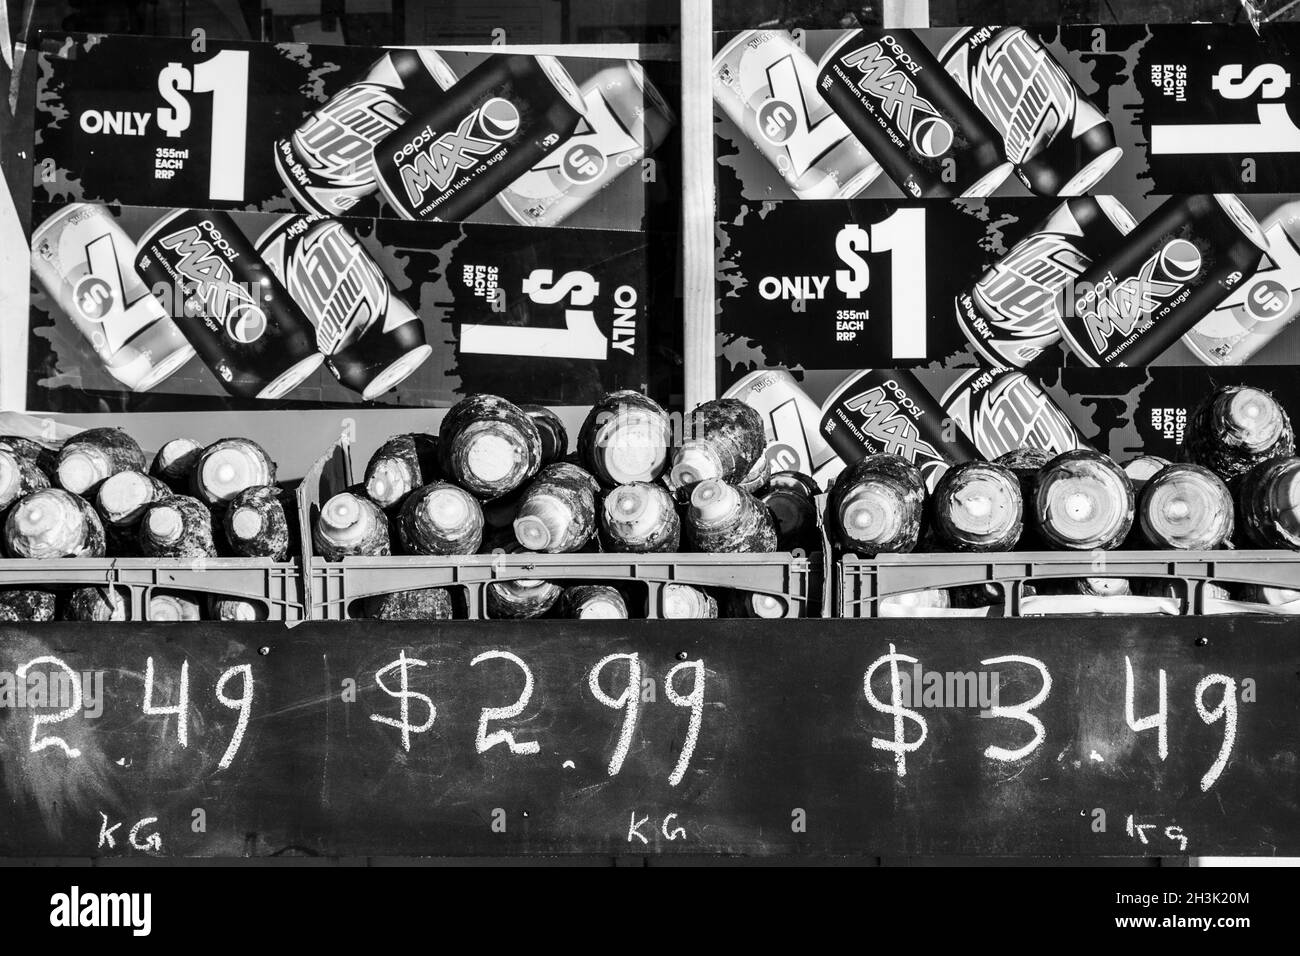 Otara markets, Auckland, Shop front of fruit and vegetable store Stock Photo